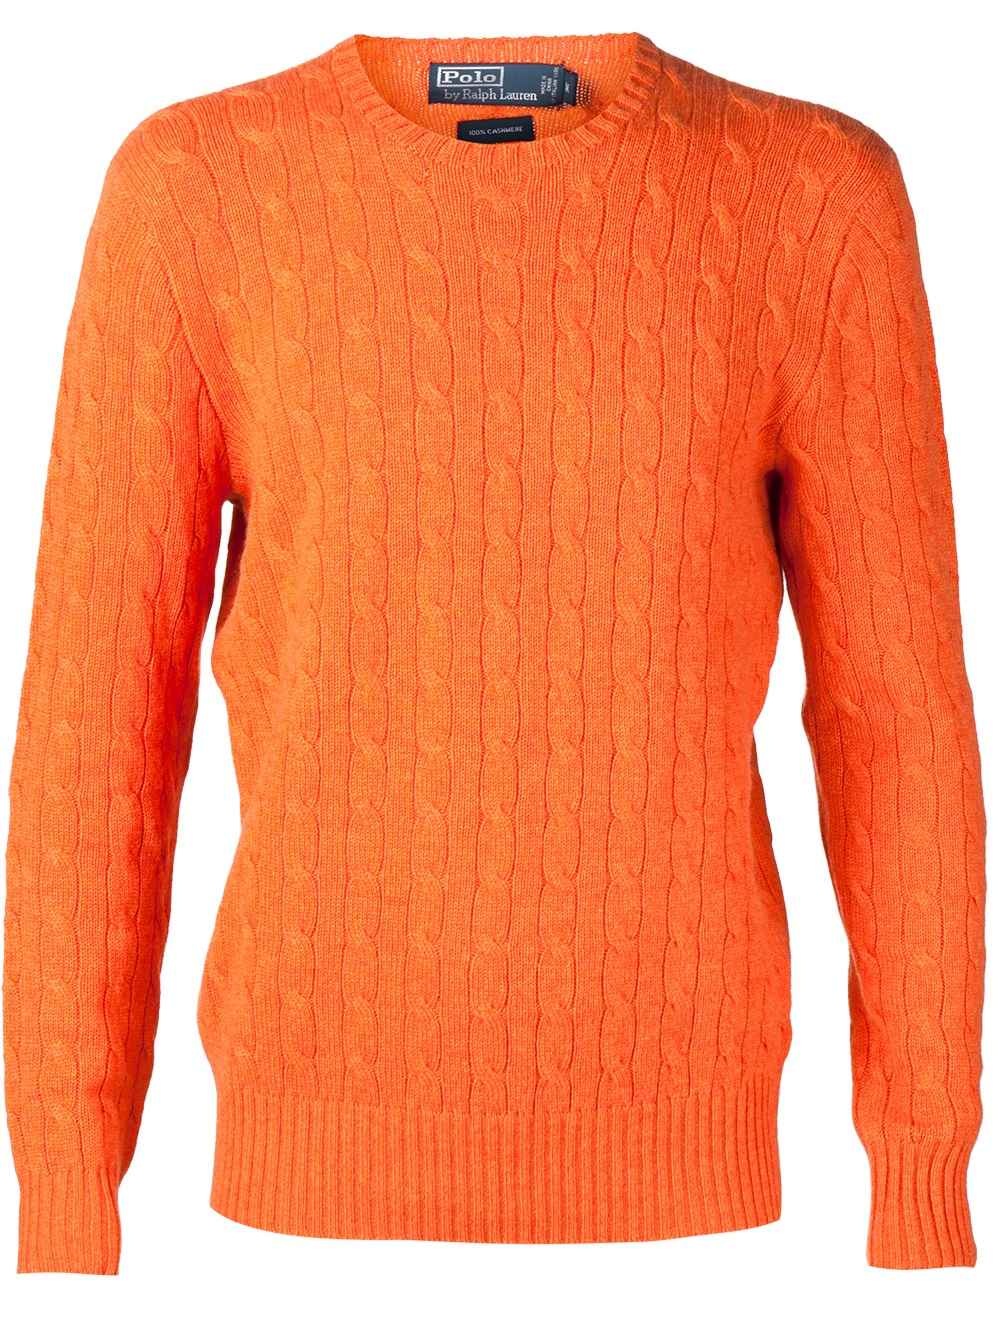 Polo Ralph Lauren Cashmere Cable Knit Sweater in Yellow & Orange ...